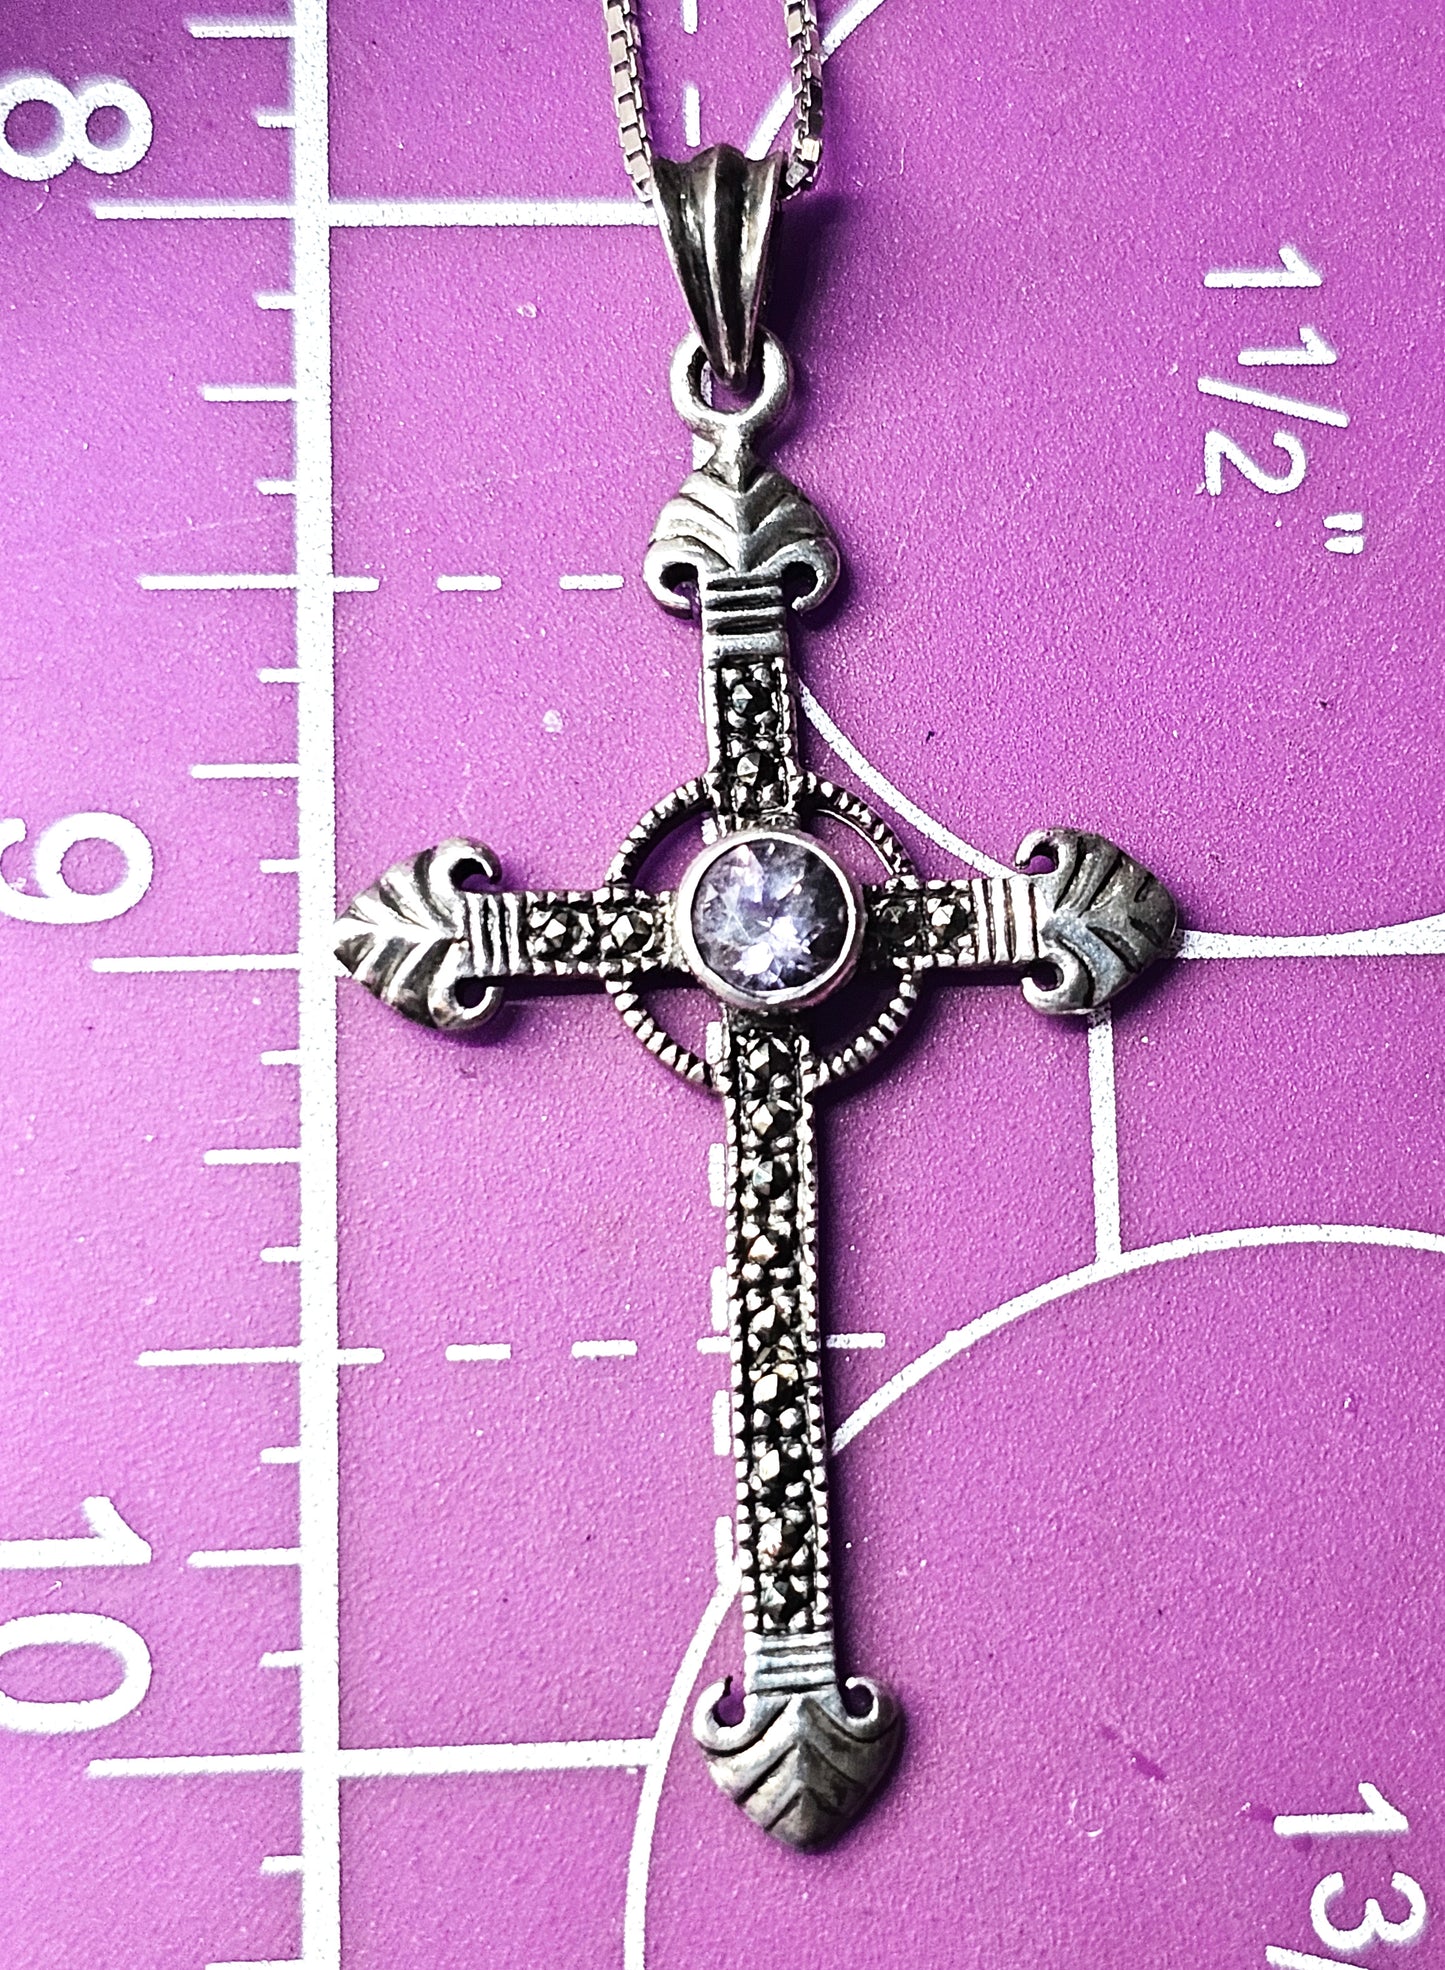 Amethyst and Marcasite SU sterling silver vintage  cross pendant necklace